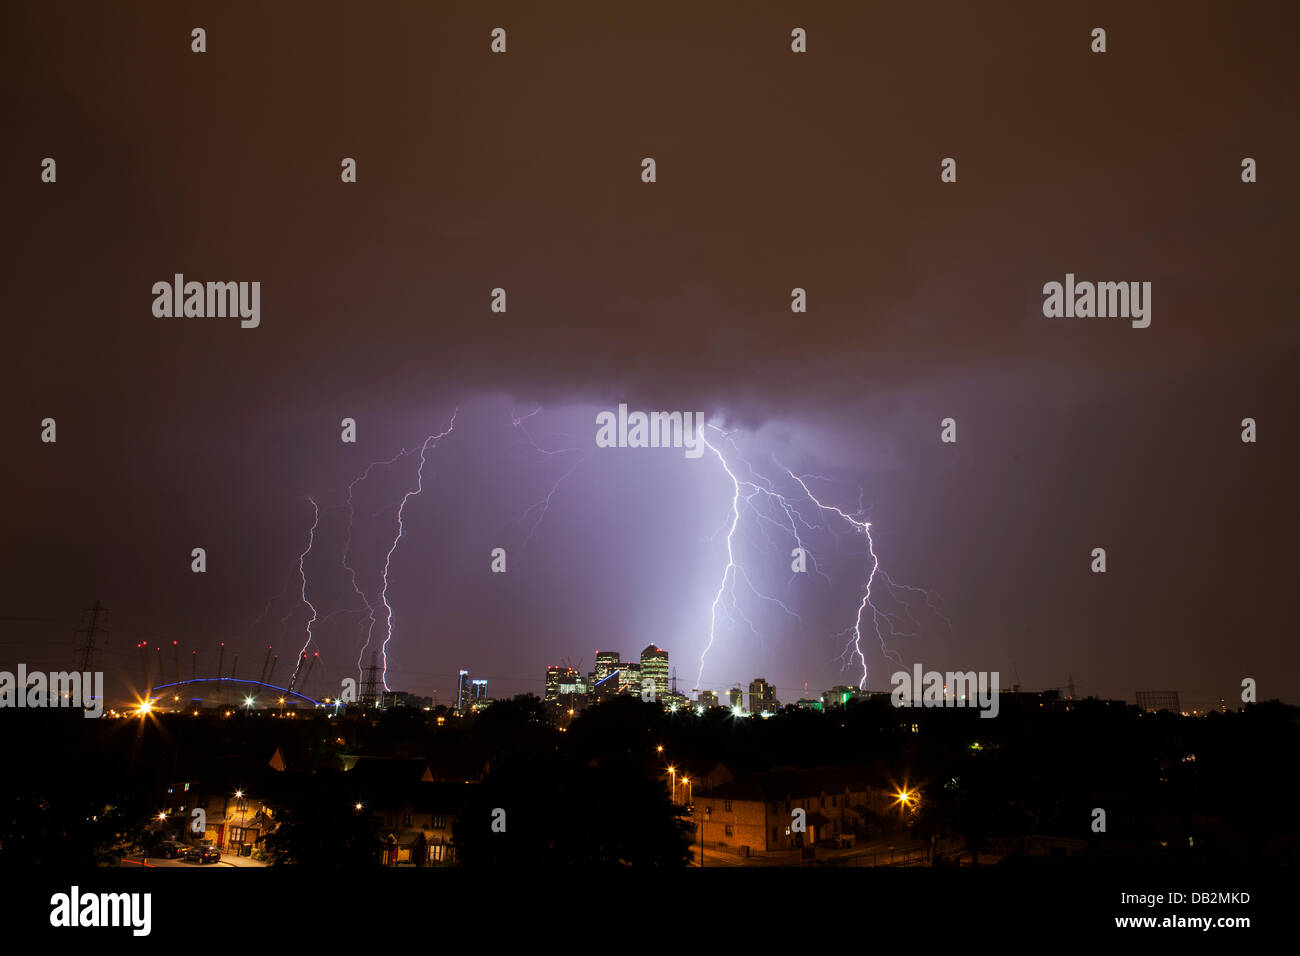 London, UK. 23rd July, 2013. Lightning strikes over London with the Docklands lit up in front. The pictures of the storm were taken just after midnight this morning.  Credit:  Vitor Da Silva/Alamy Live News Stock Photo